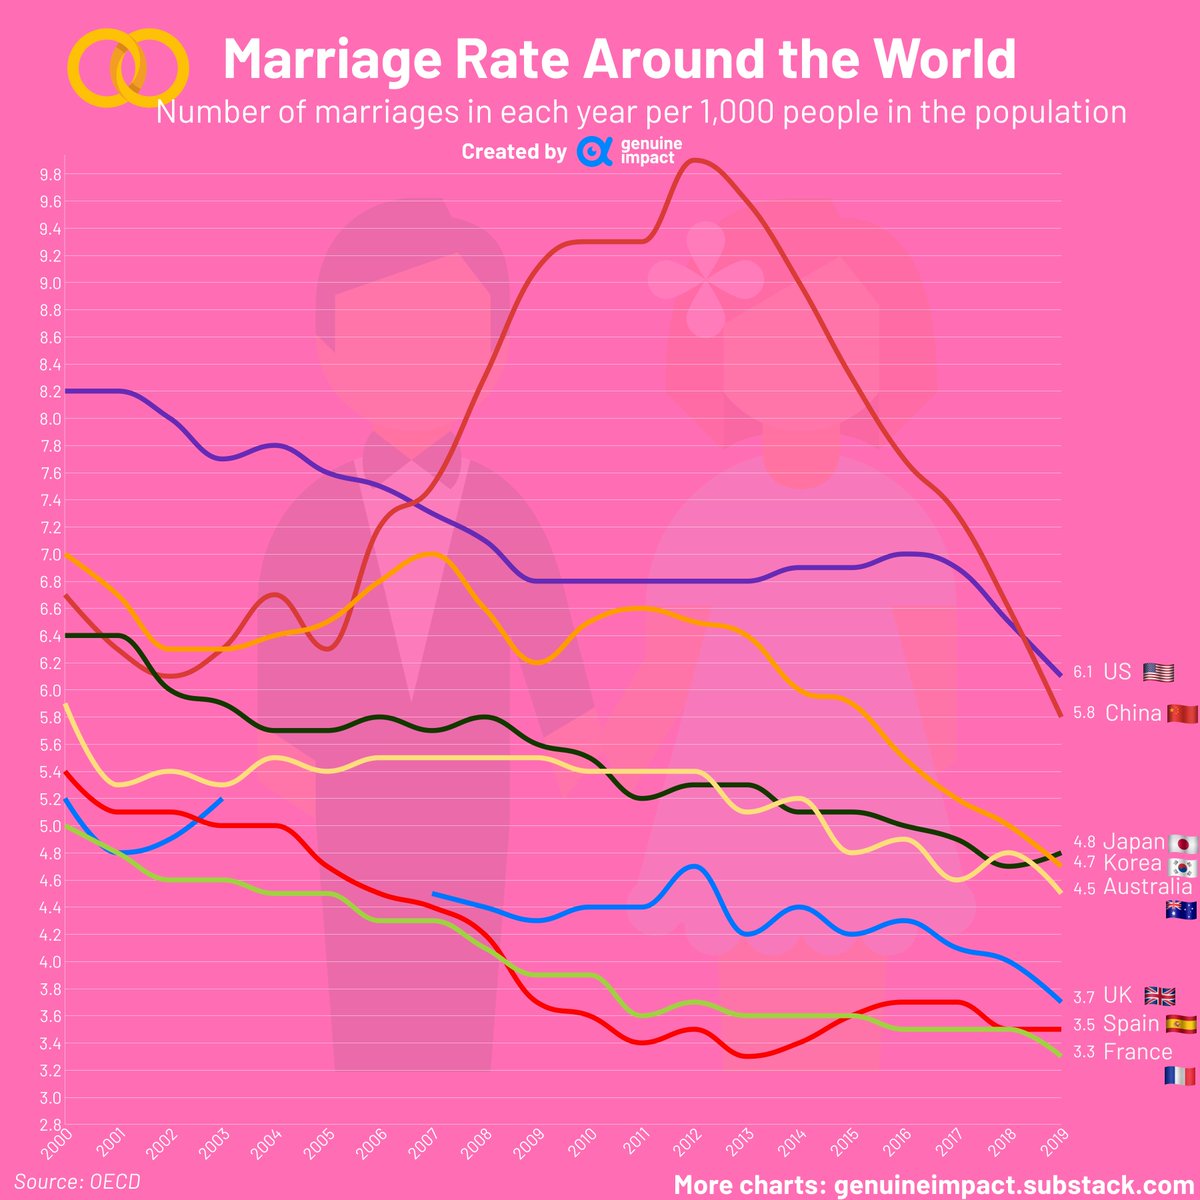 💒In many countries, marriage rates are declining⬇️. Over the past 20 years, marriage rates in the US🇺🇸 have dropped by 25% and are currently at their lowest point in recorded history. In China🇨🇳, marriage rates have also been sharply declining over the past decade. #marriage